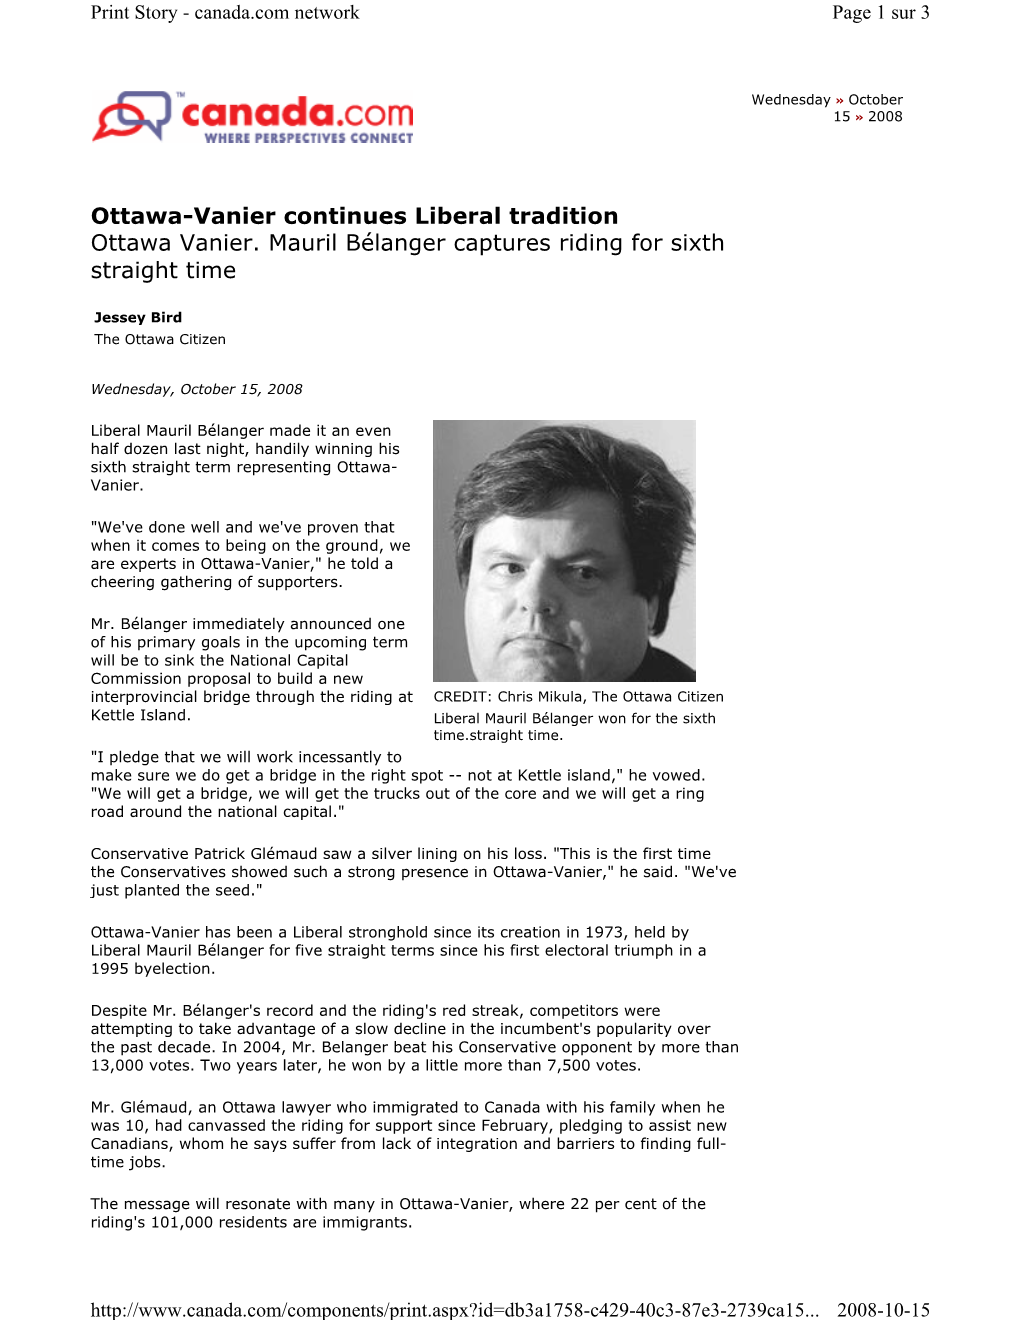 Ottawa-Vanier Continues Liberal Tradition Ottawa Vanier. Mauril Bélanger Captures Riding for Sixth Straight Time